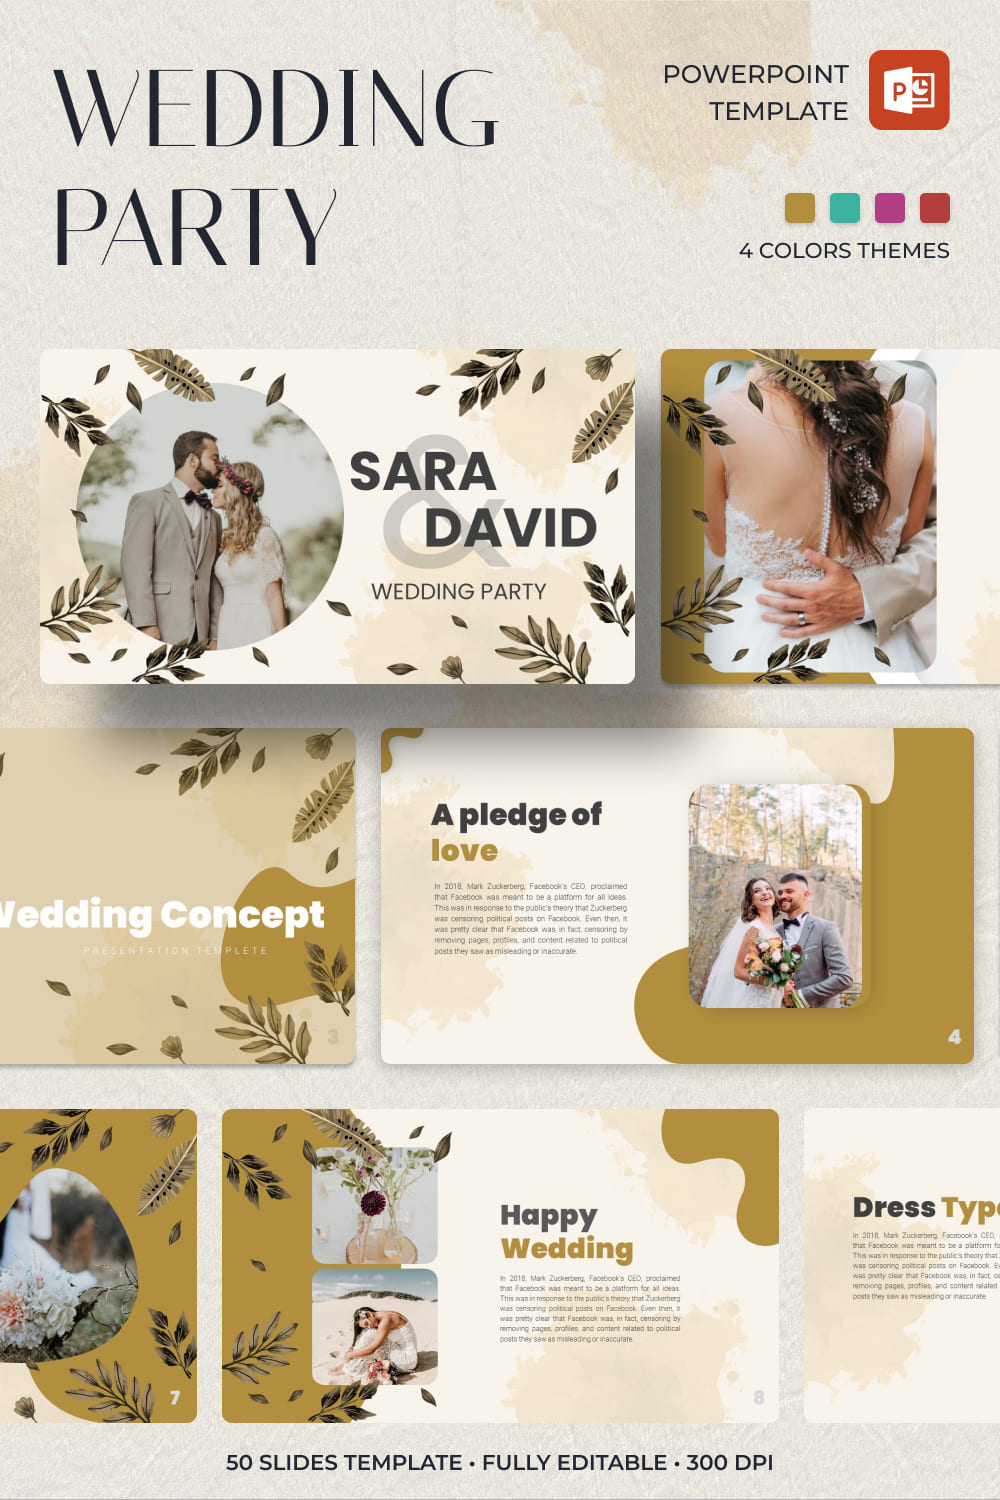 2 weddingparty powerpoint template 1000h1500